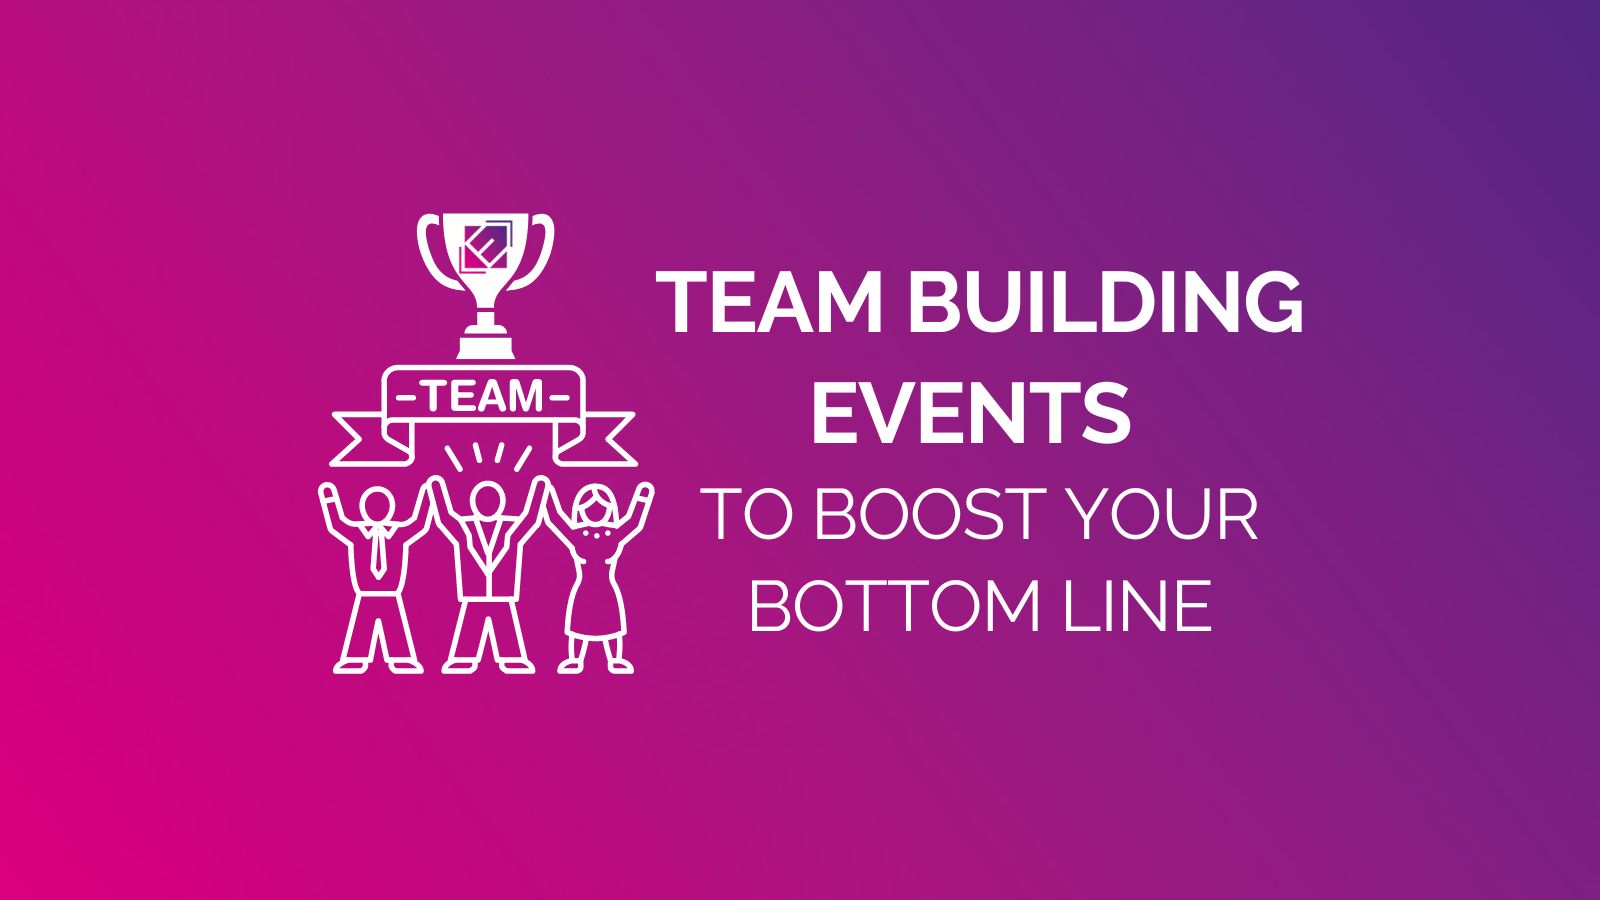 Team building events to boost your bottom line blog Eventify even management